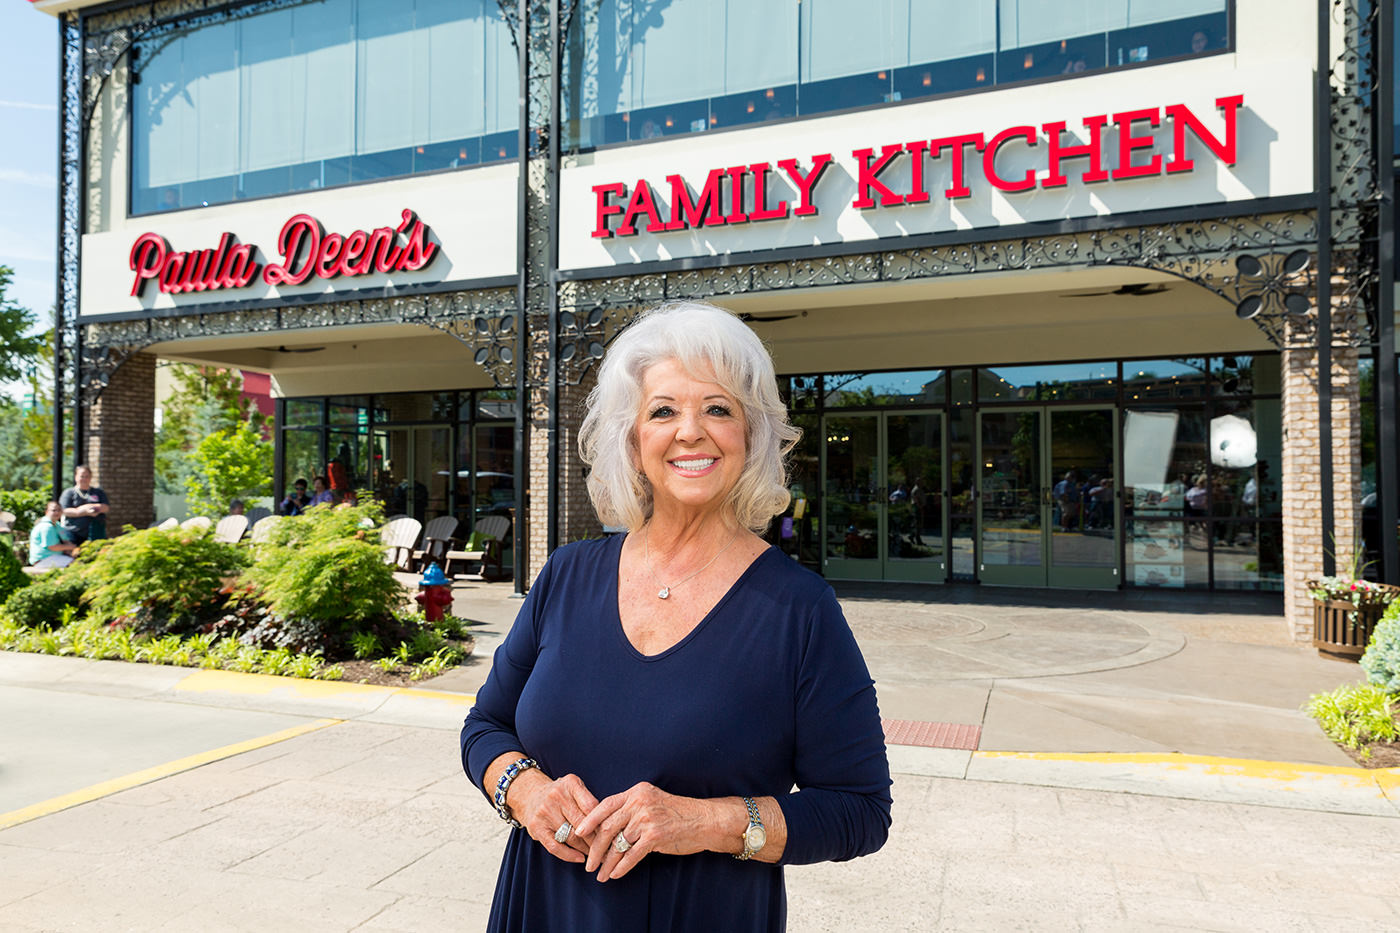 Paula Deen S Family Kitchen At The Island In Pigeon Forge Paula Deen S Family Kitchen